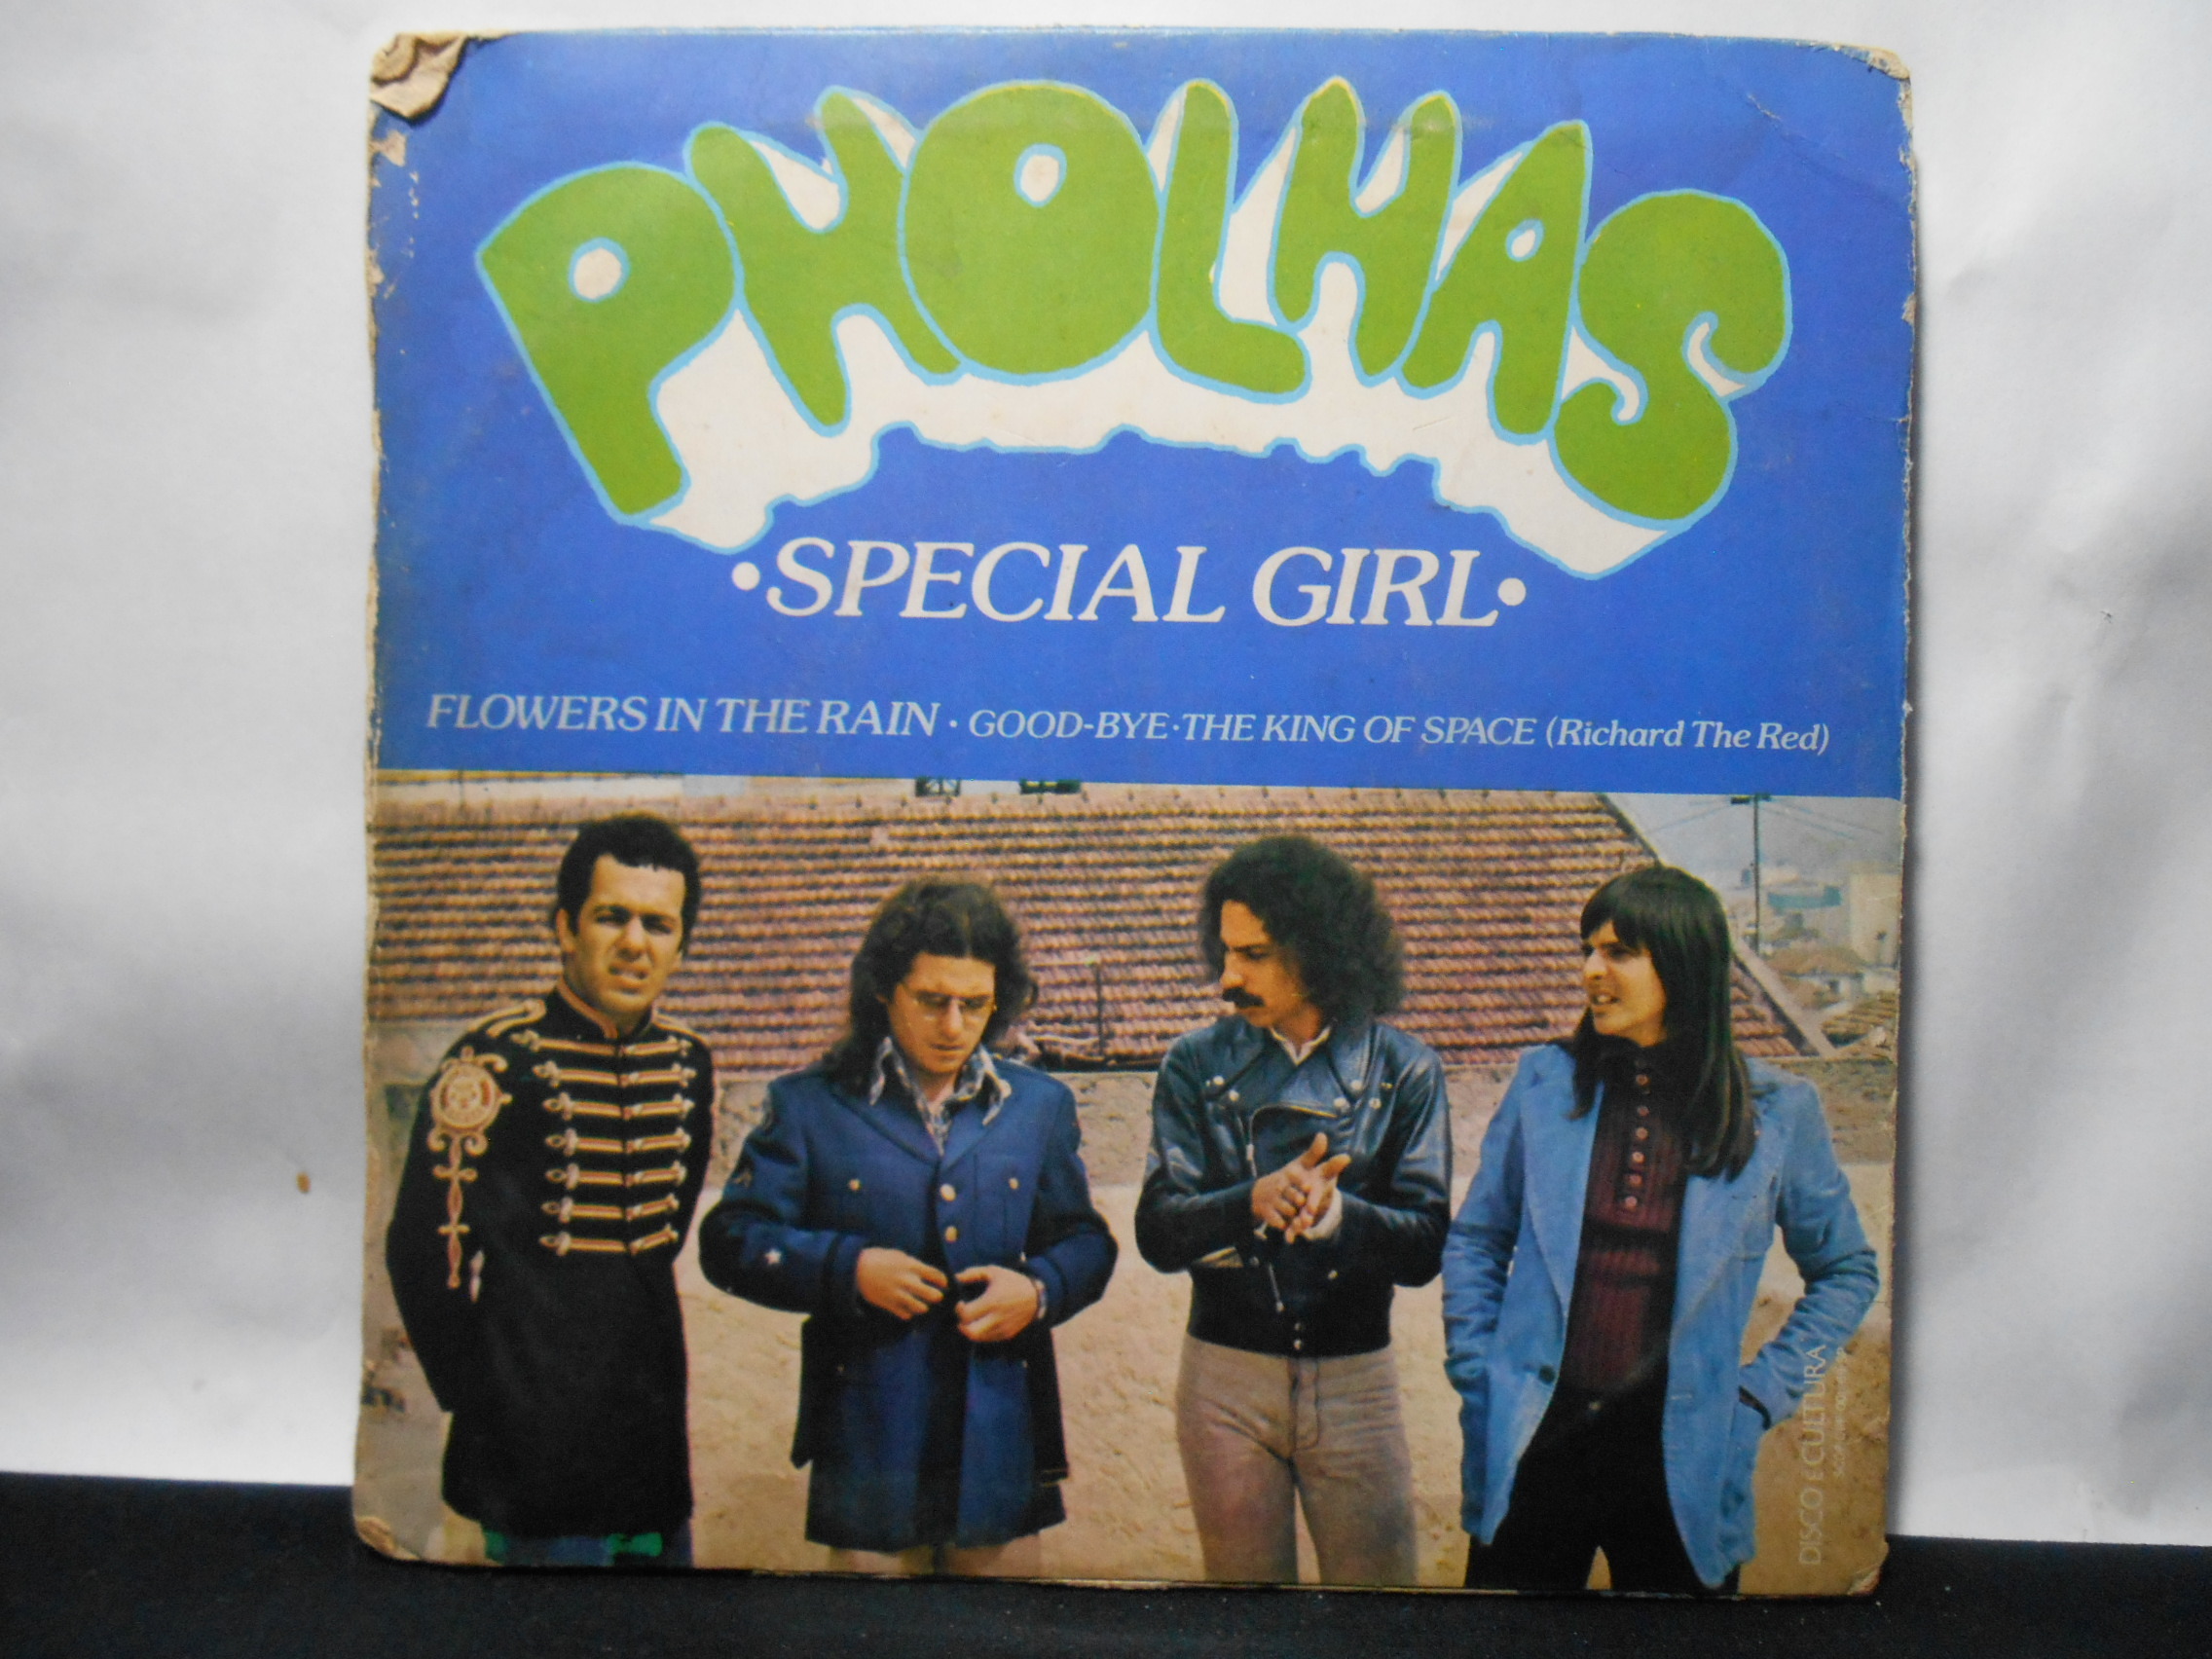 Vinil Compacto - Pholhas - Special Girl